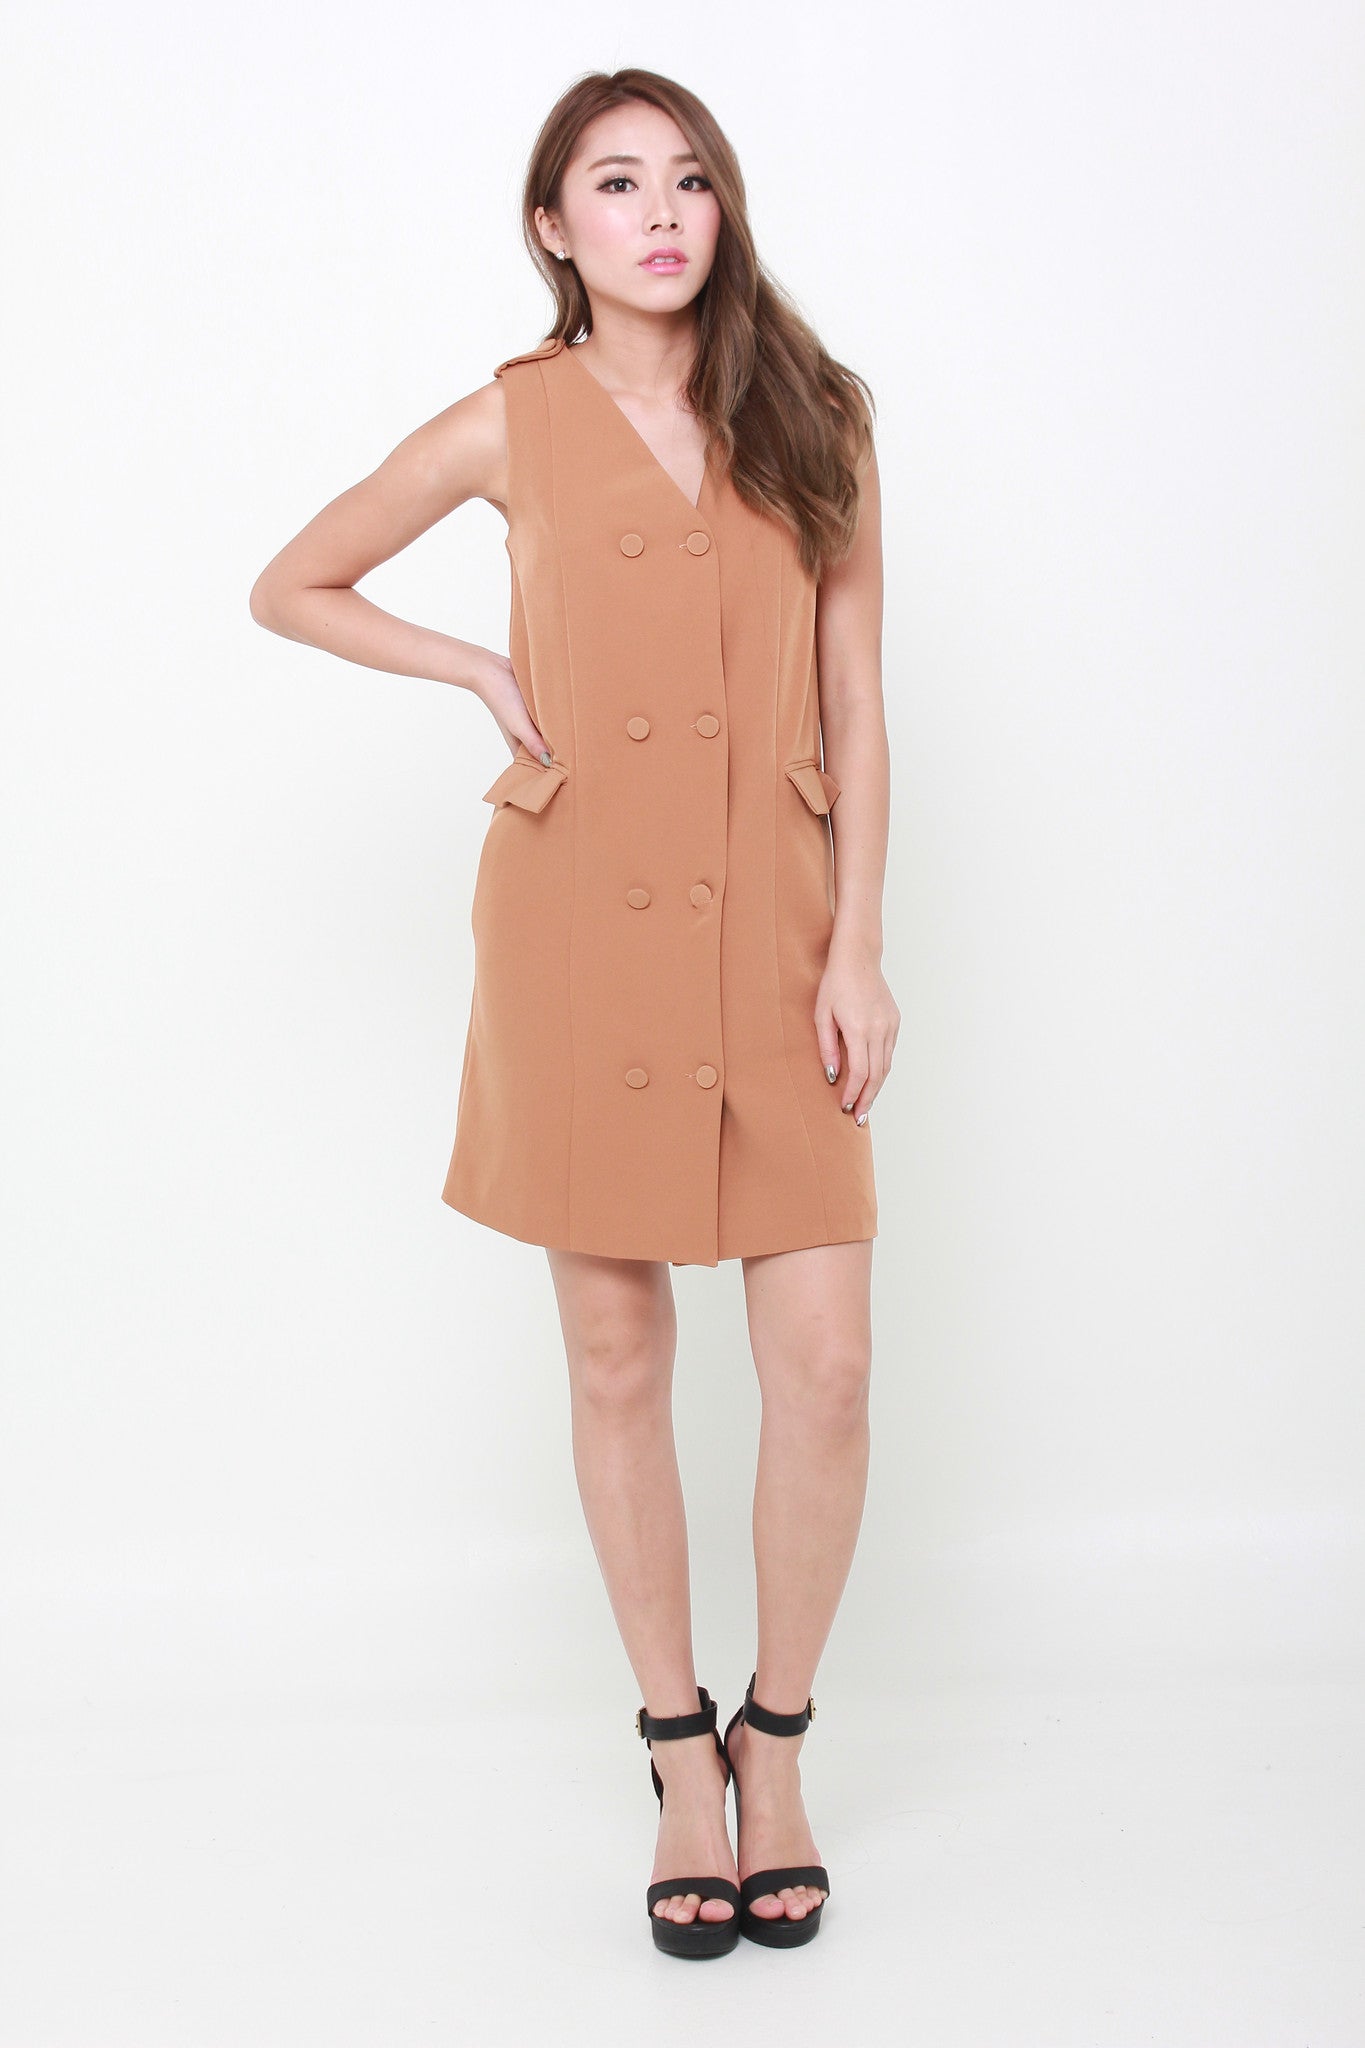 Gigi Button Trench Dress in Camel